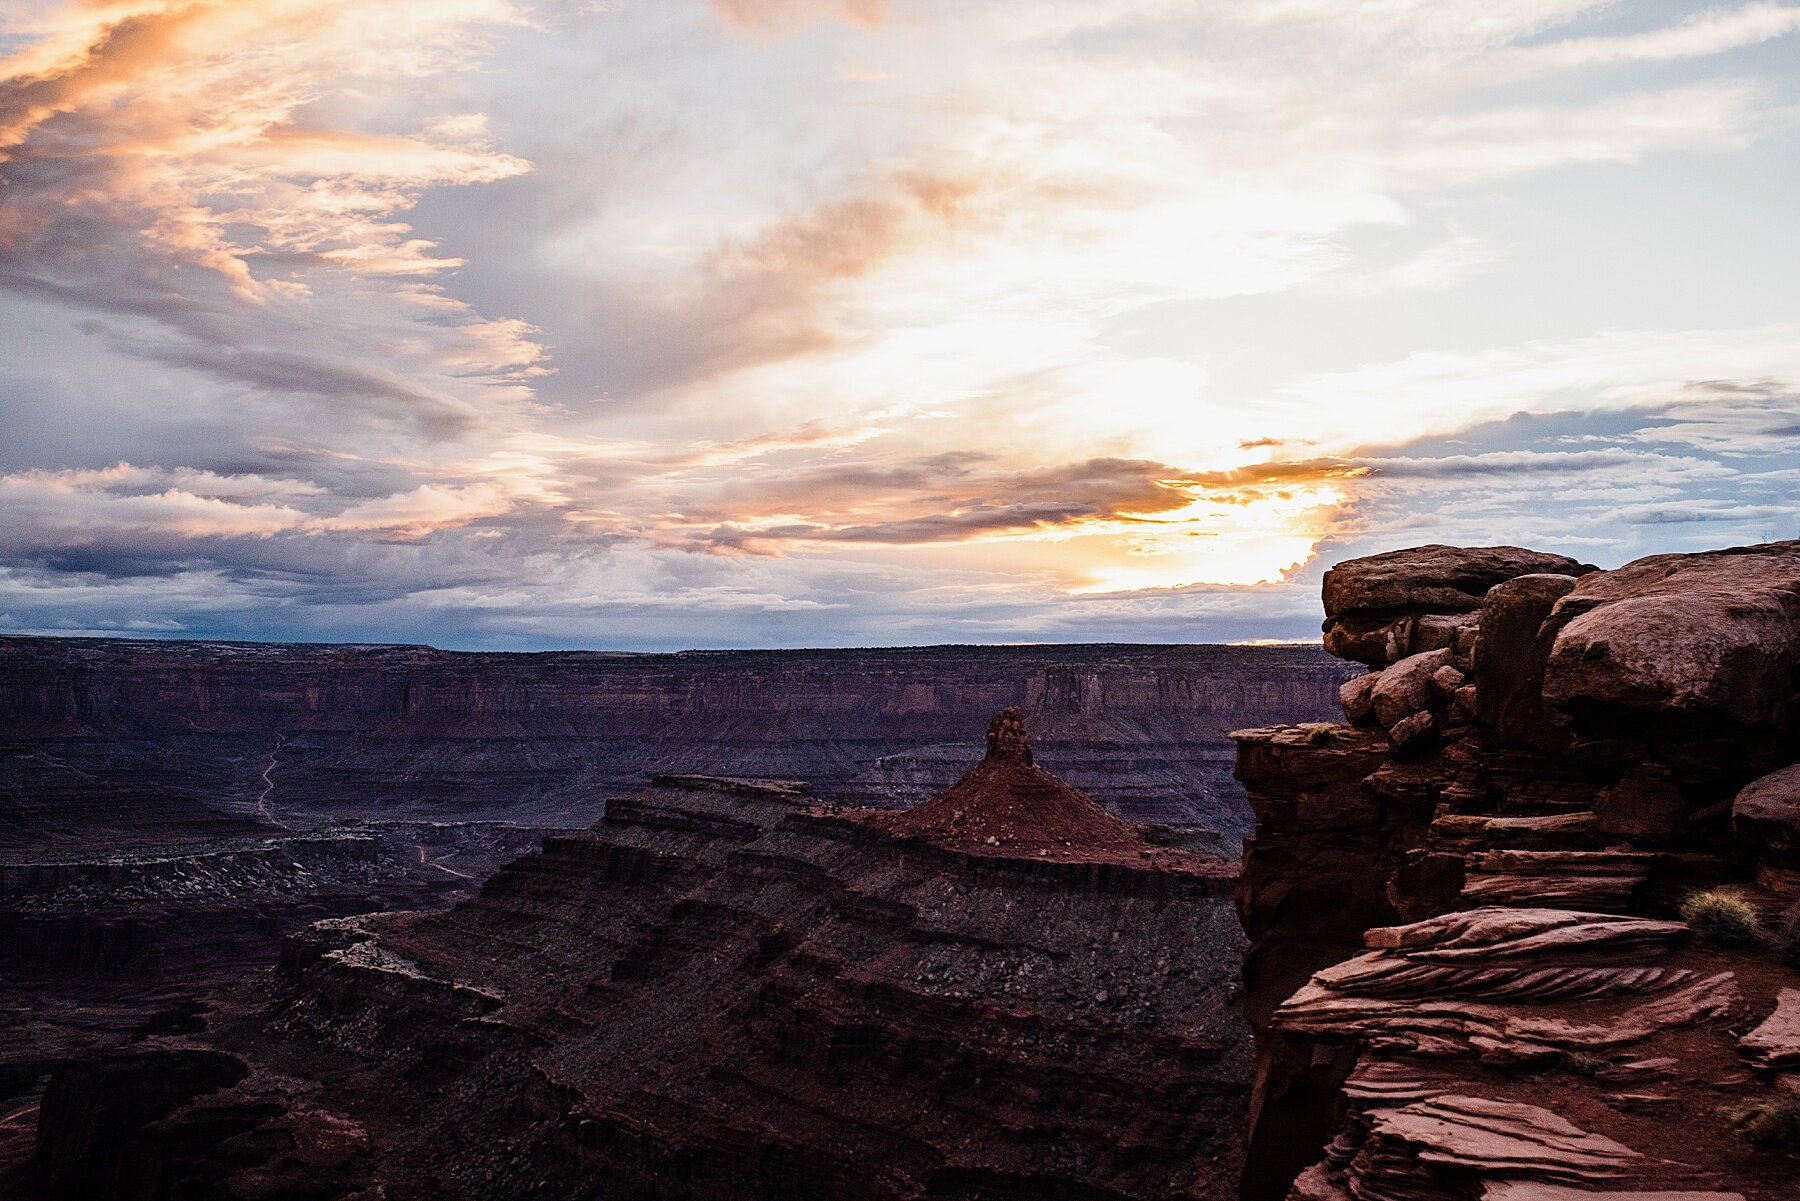 Sunset Elopement in Dead Horse Point State Park | Moab Elopement